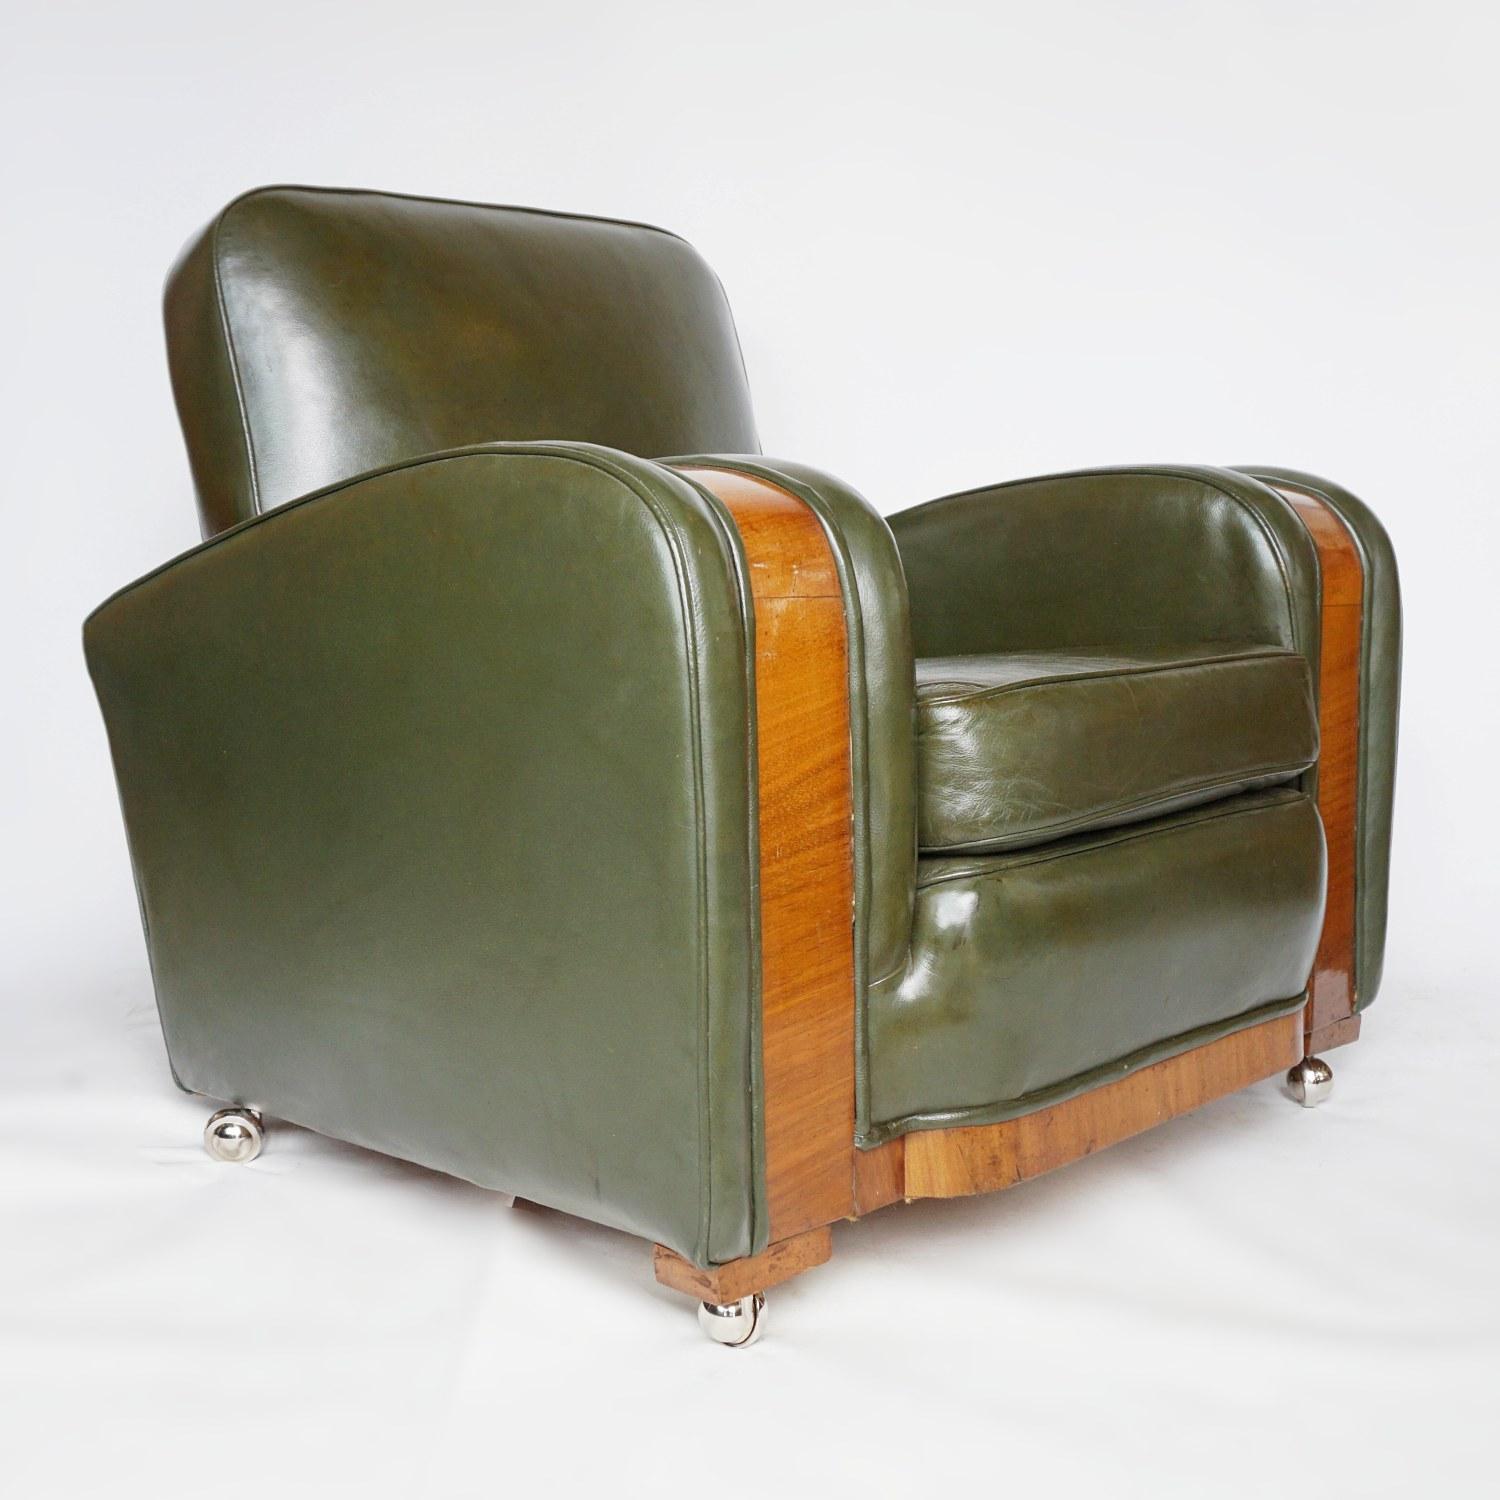 A pair of Art Deco tank chairs attributed to Heal's of London. Figured walnut veneered banding. Upholster in the original dark green leather. Set on new casters. Small bruising to the leather of one of the chairs, photographed. 

Dimensions: H